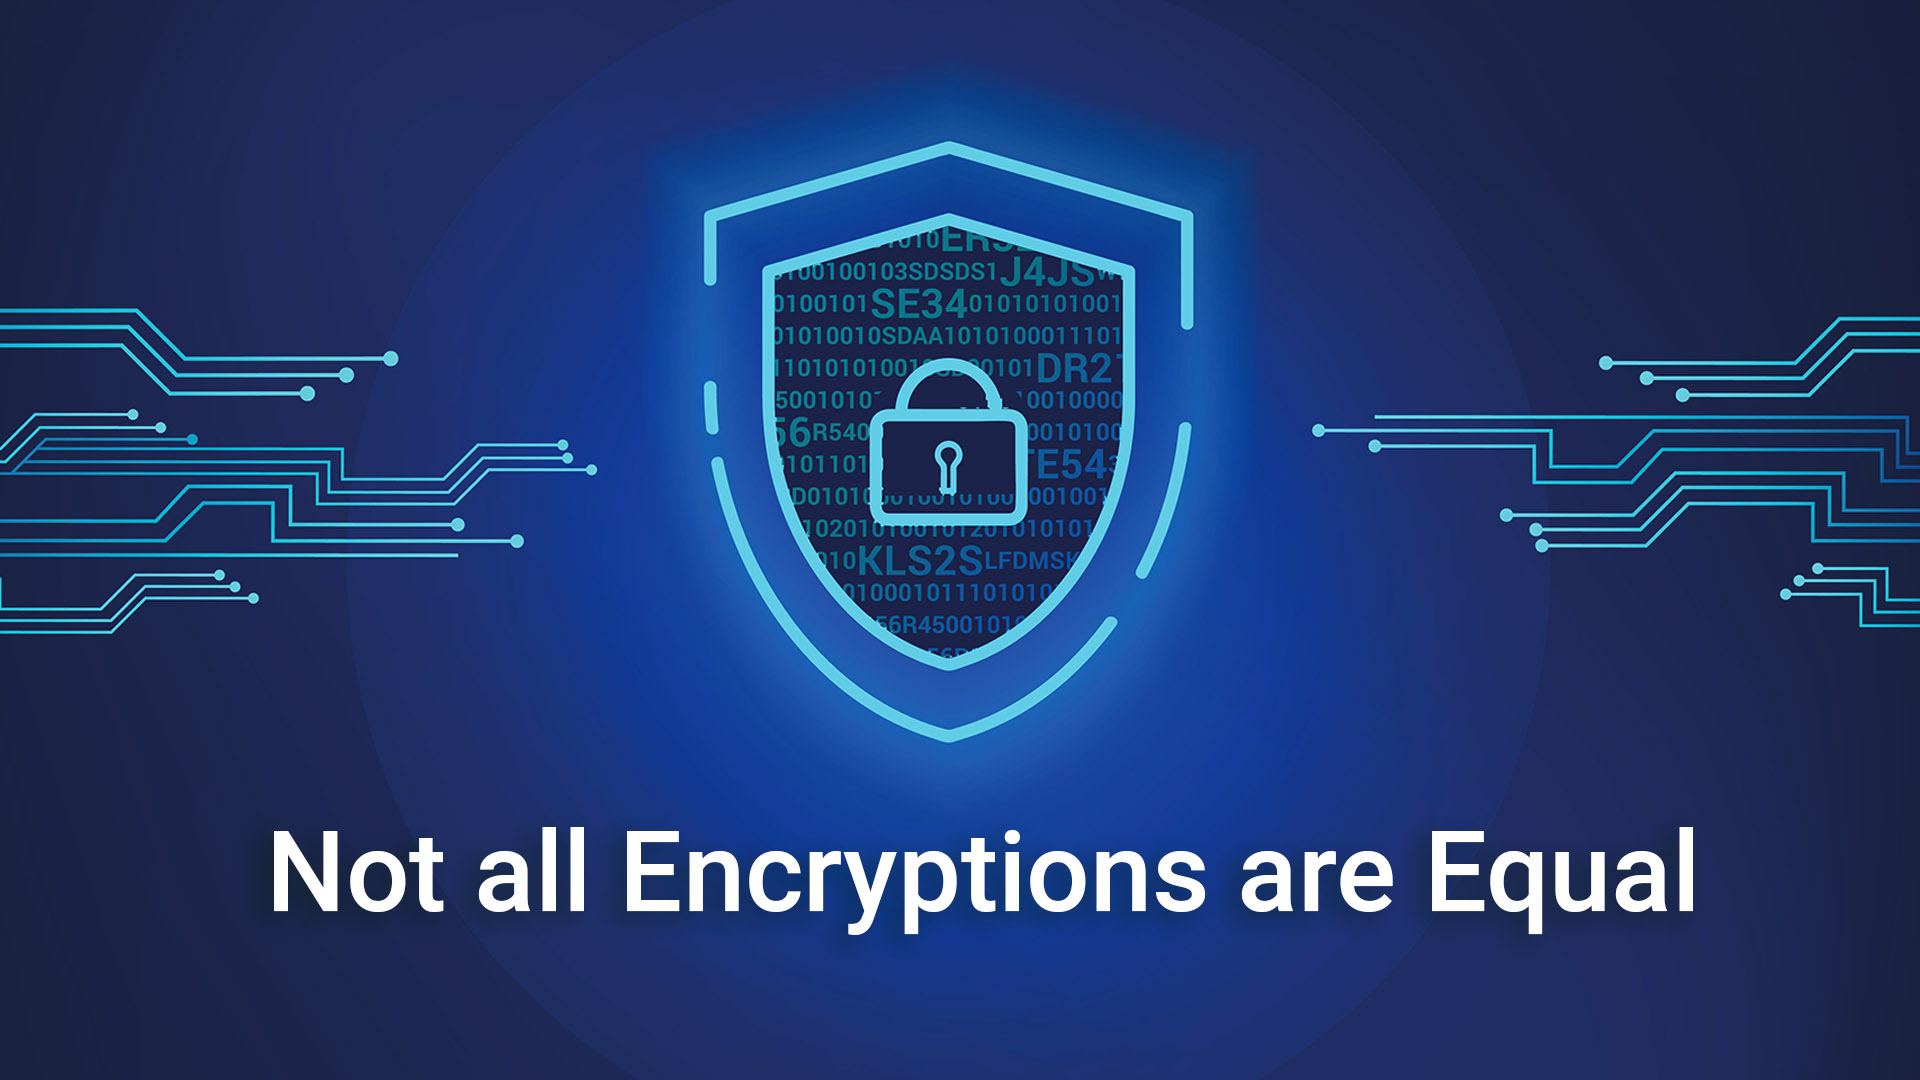 Not all Encryptions are Created Equal